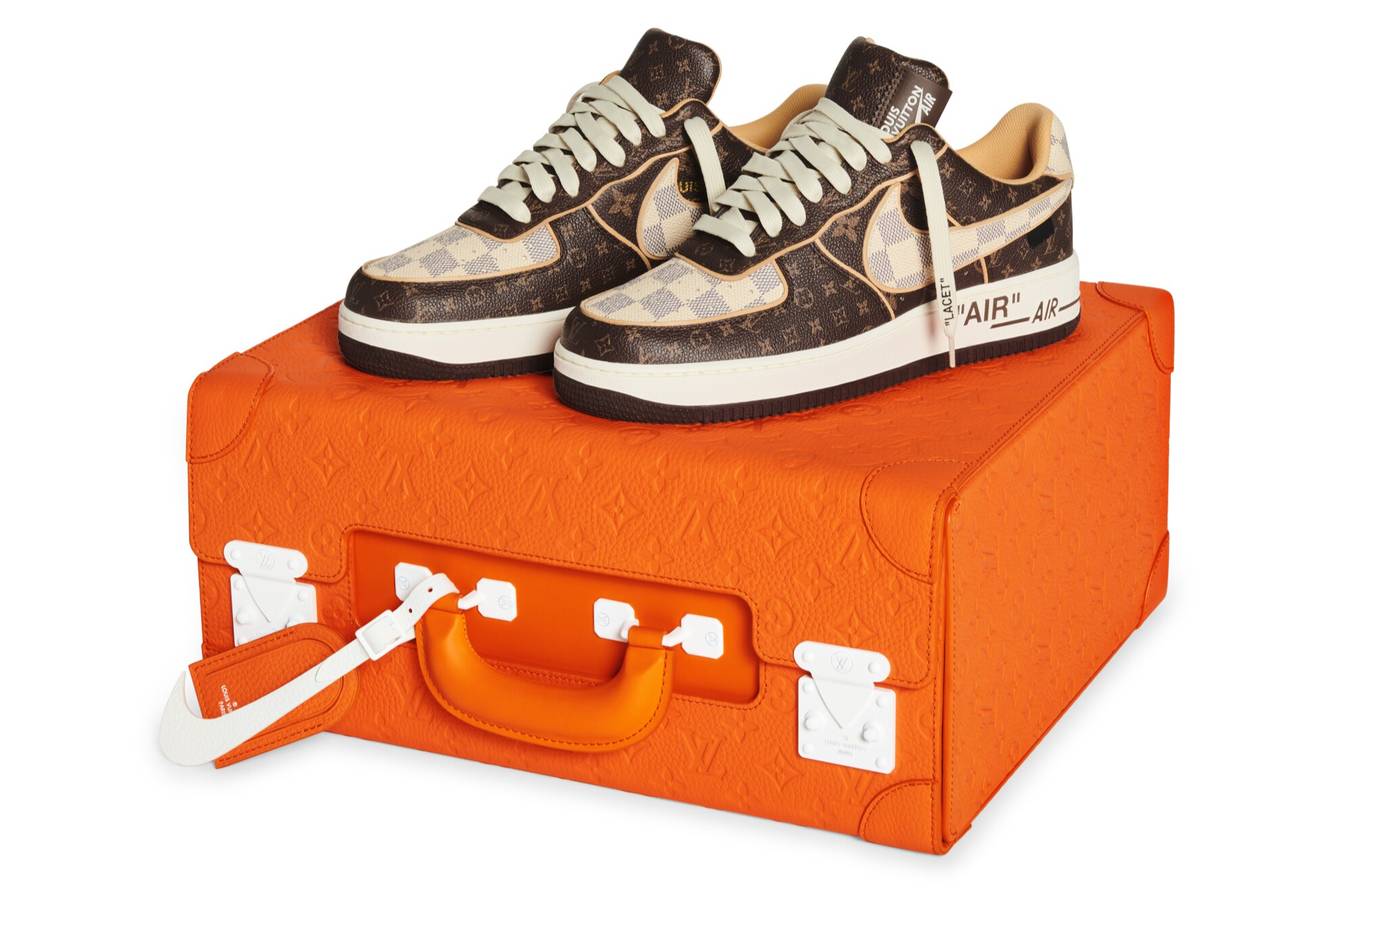 Sotheby's Louis Vuitton x Nike Auction Fetches $25.3 Million - MOJEH